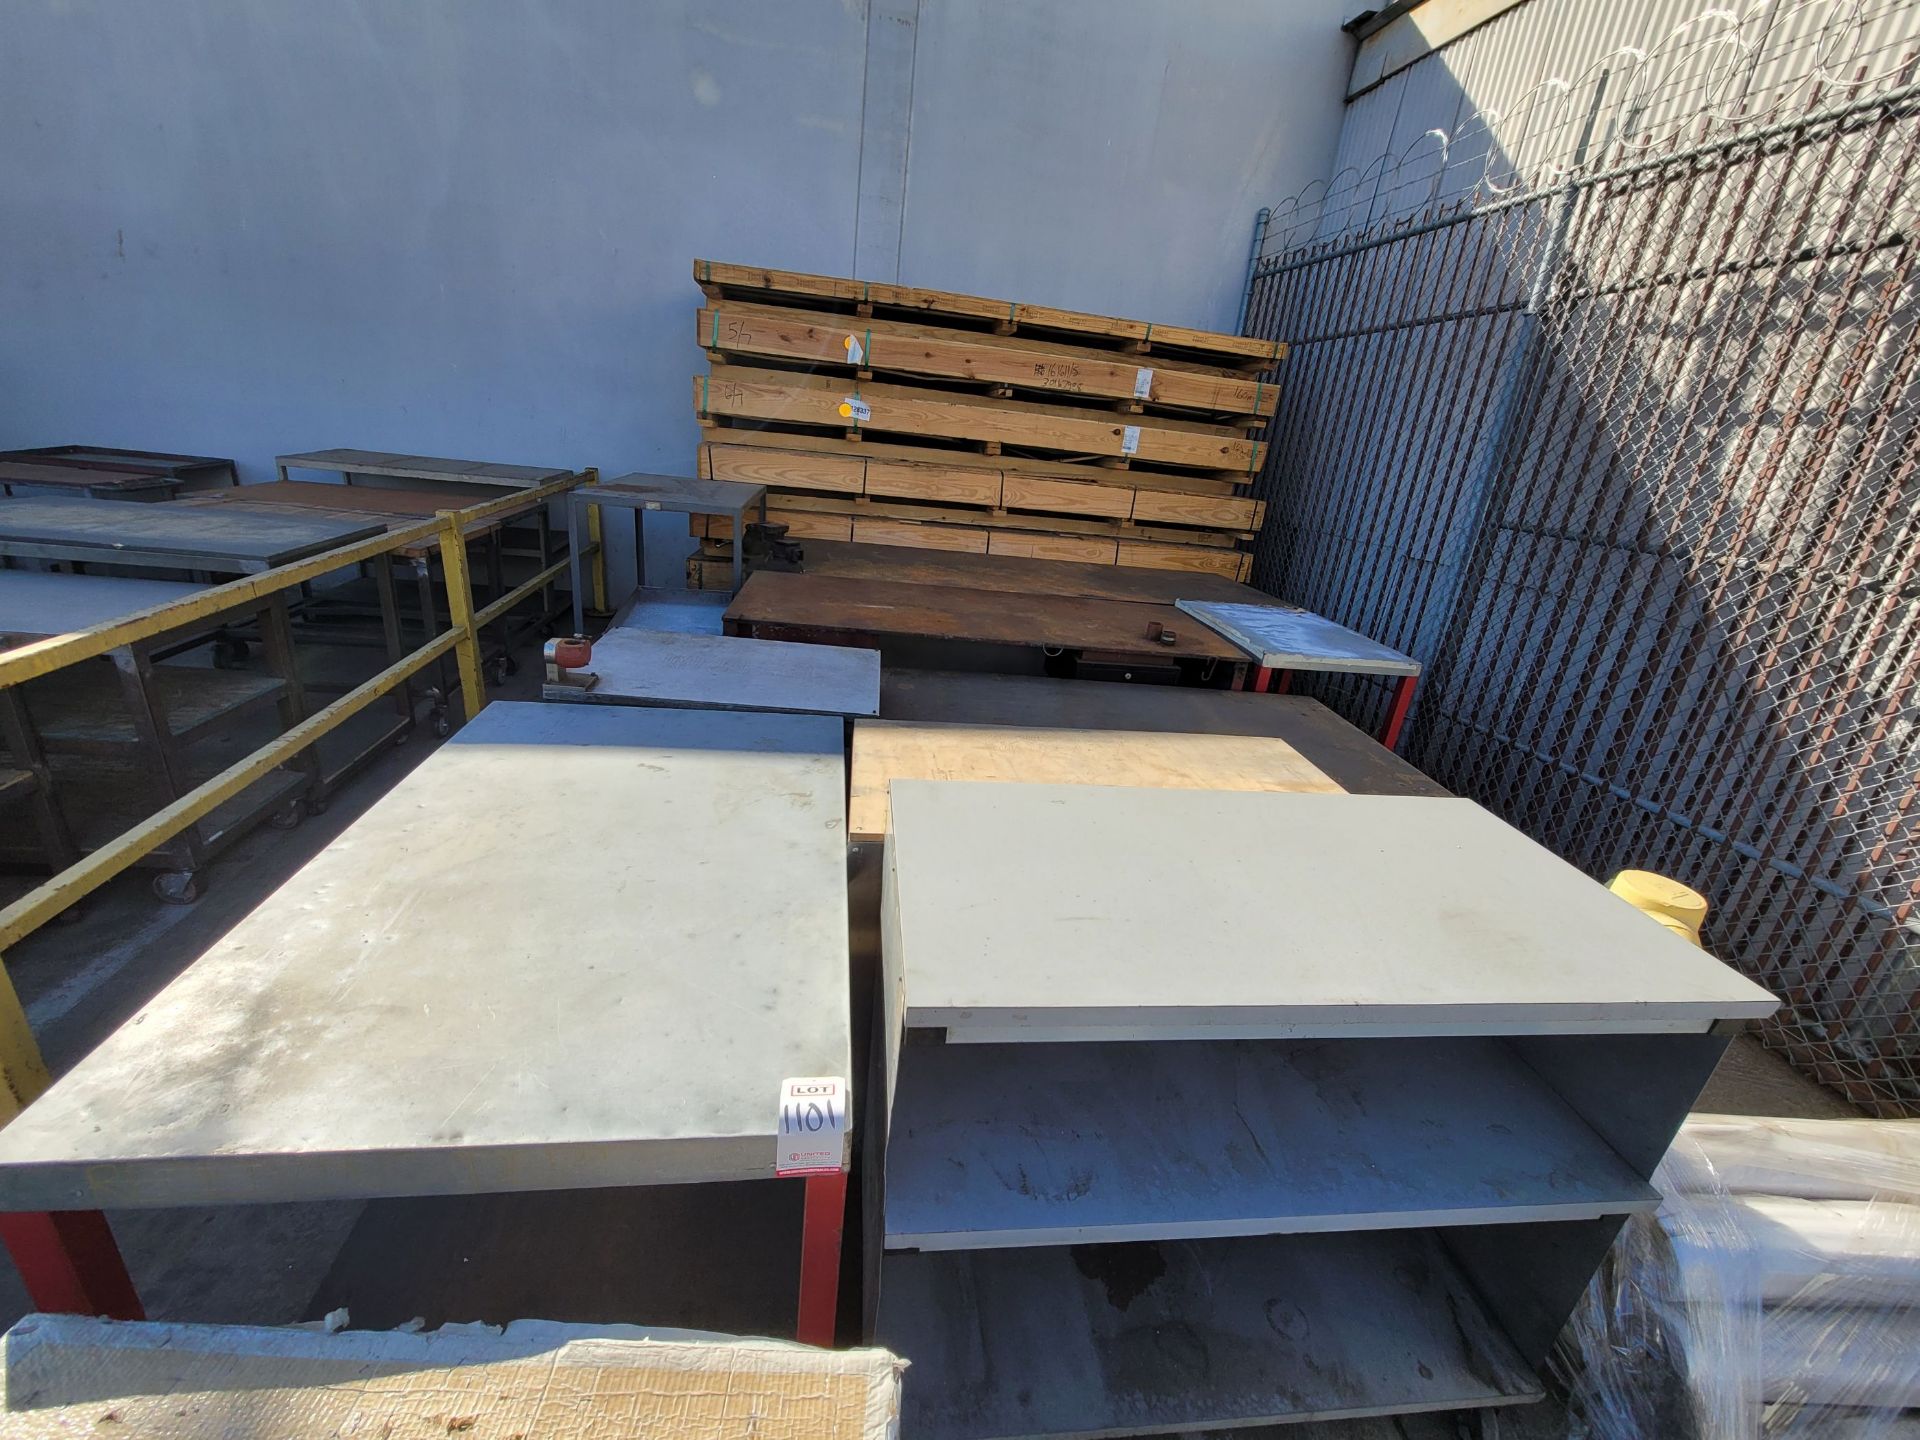 LOT - APPROX. (11) PIECES/GROUPING OF METAL TABLES AND CARTS, THIS LOT CONTAINS (2) POTENTIAL